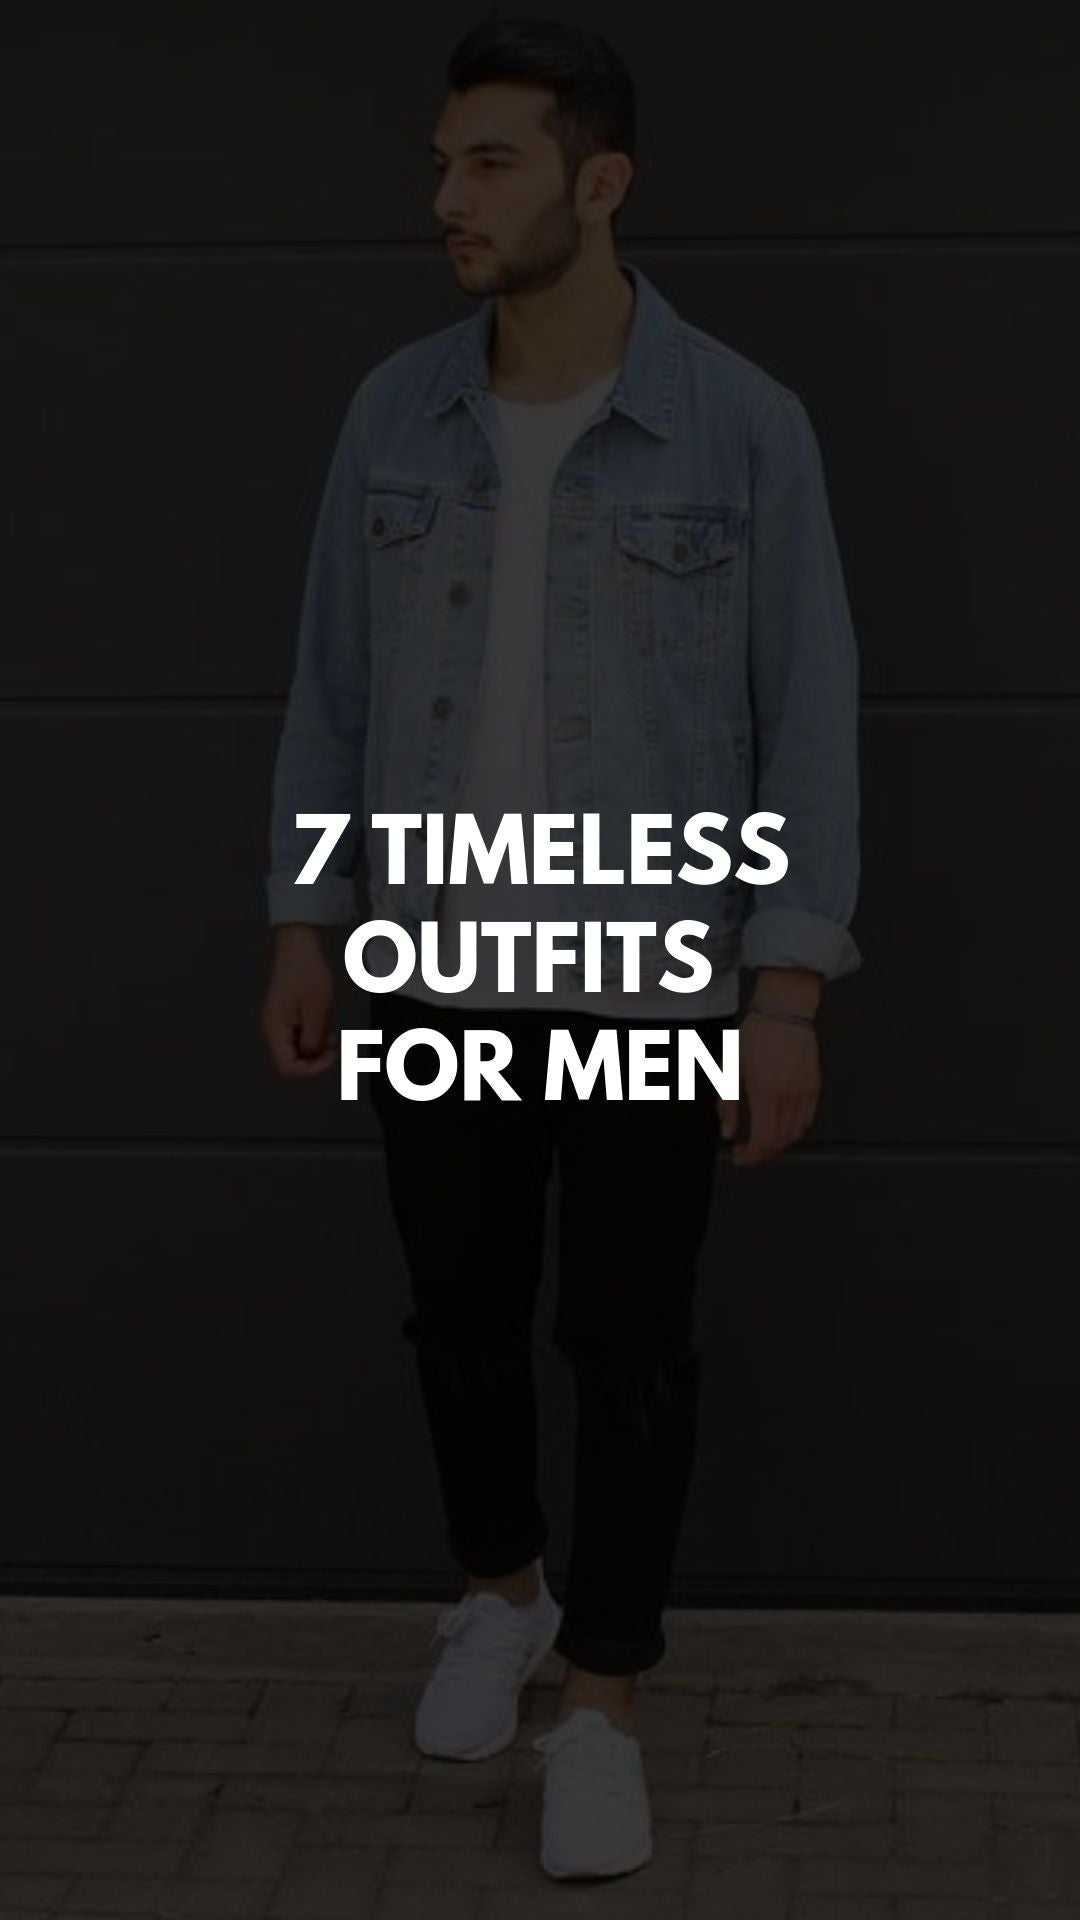 7 Timeless Outfits For Men